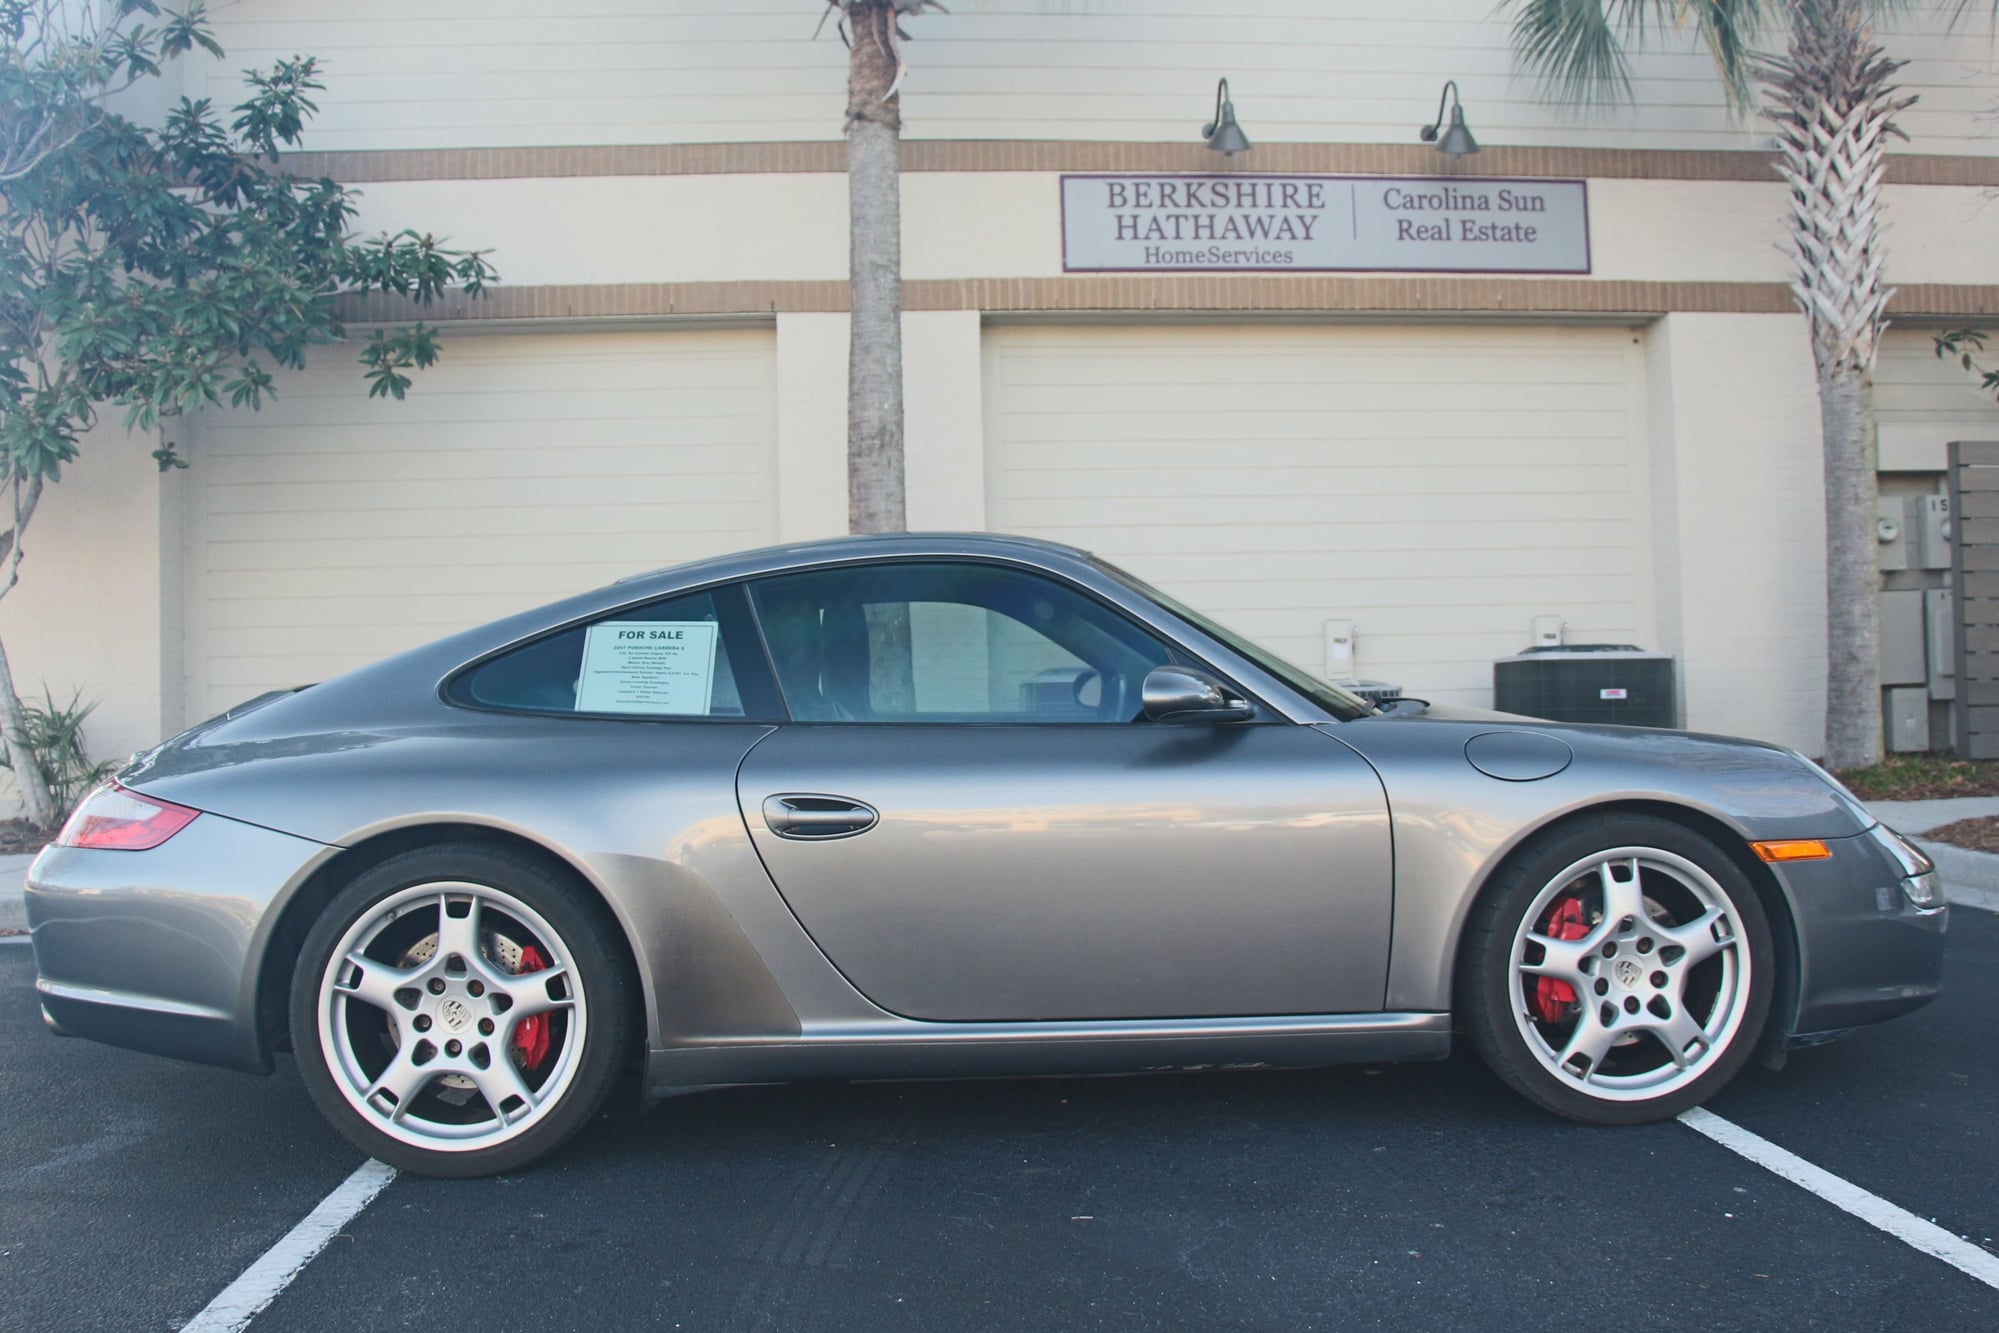 2007 Porsche 911 -  - Used - VIN WPOAB29947S731427 - 84,750 Miles - 6 cyl - 2WD - Manual - Coupe - Gray - Mt Pleasant, SC 29464, United States